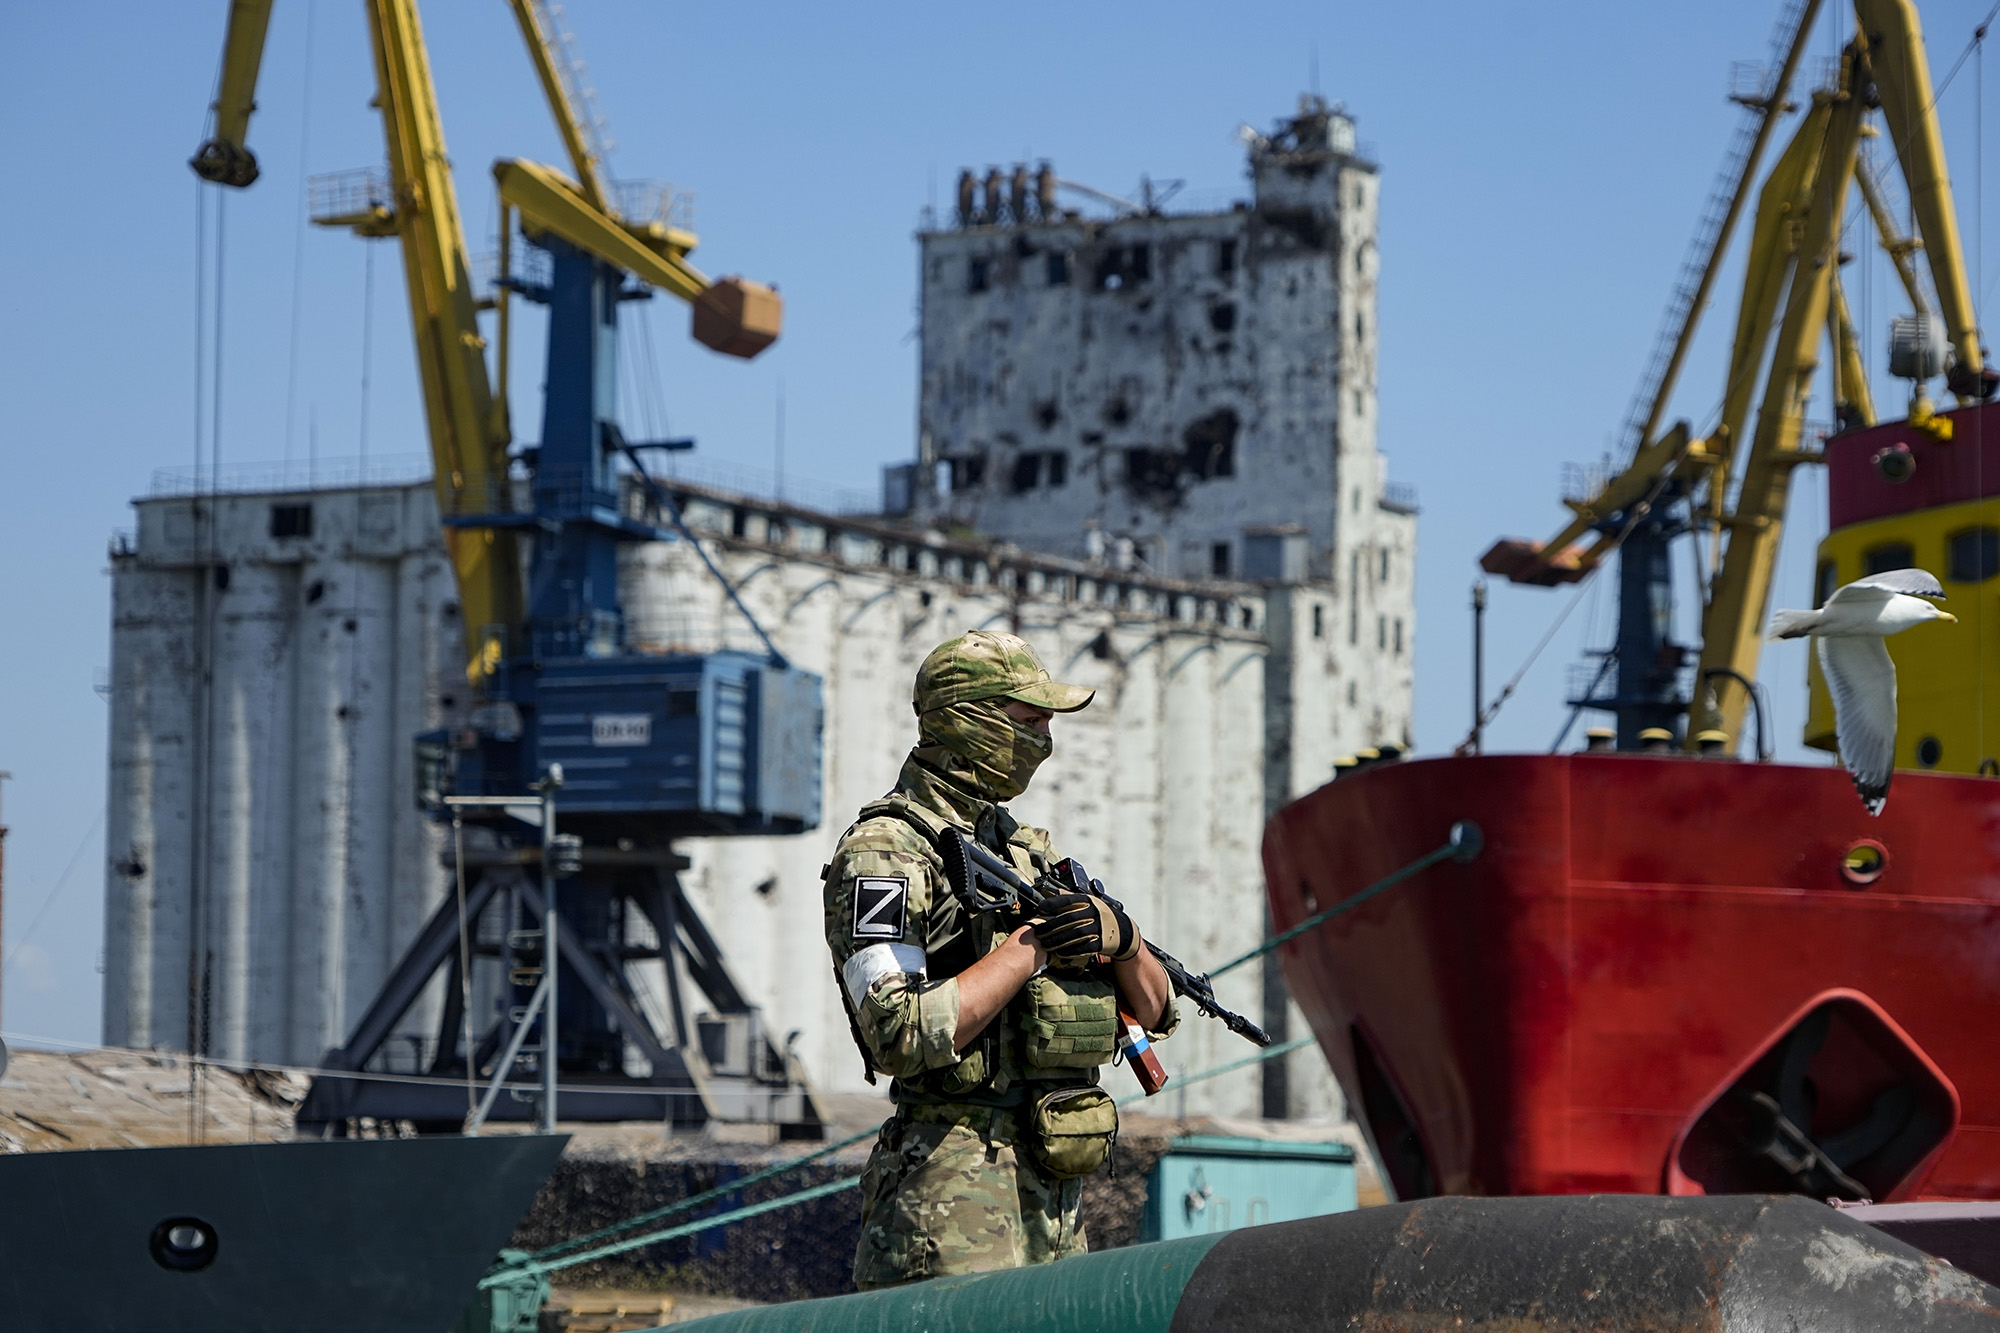 A Russian soldier guards a pier with grain storage silos in the background at Mariupol Sea Port, Ukraine, on June 12.